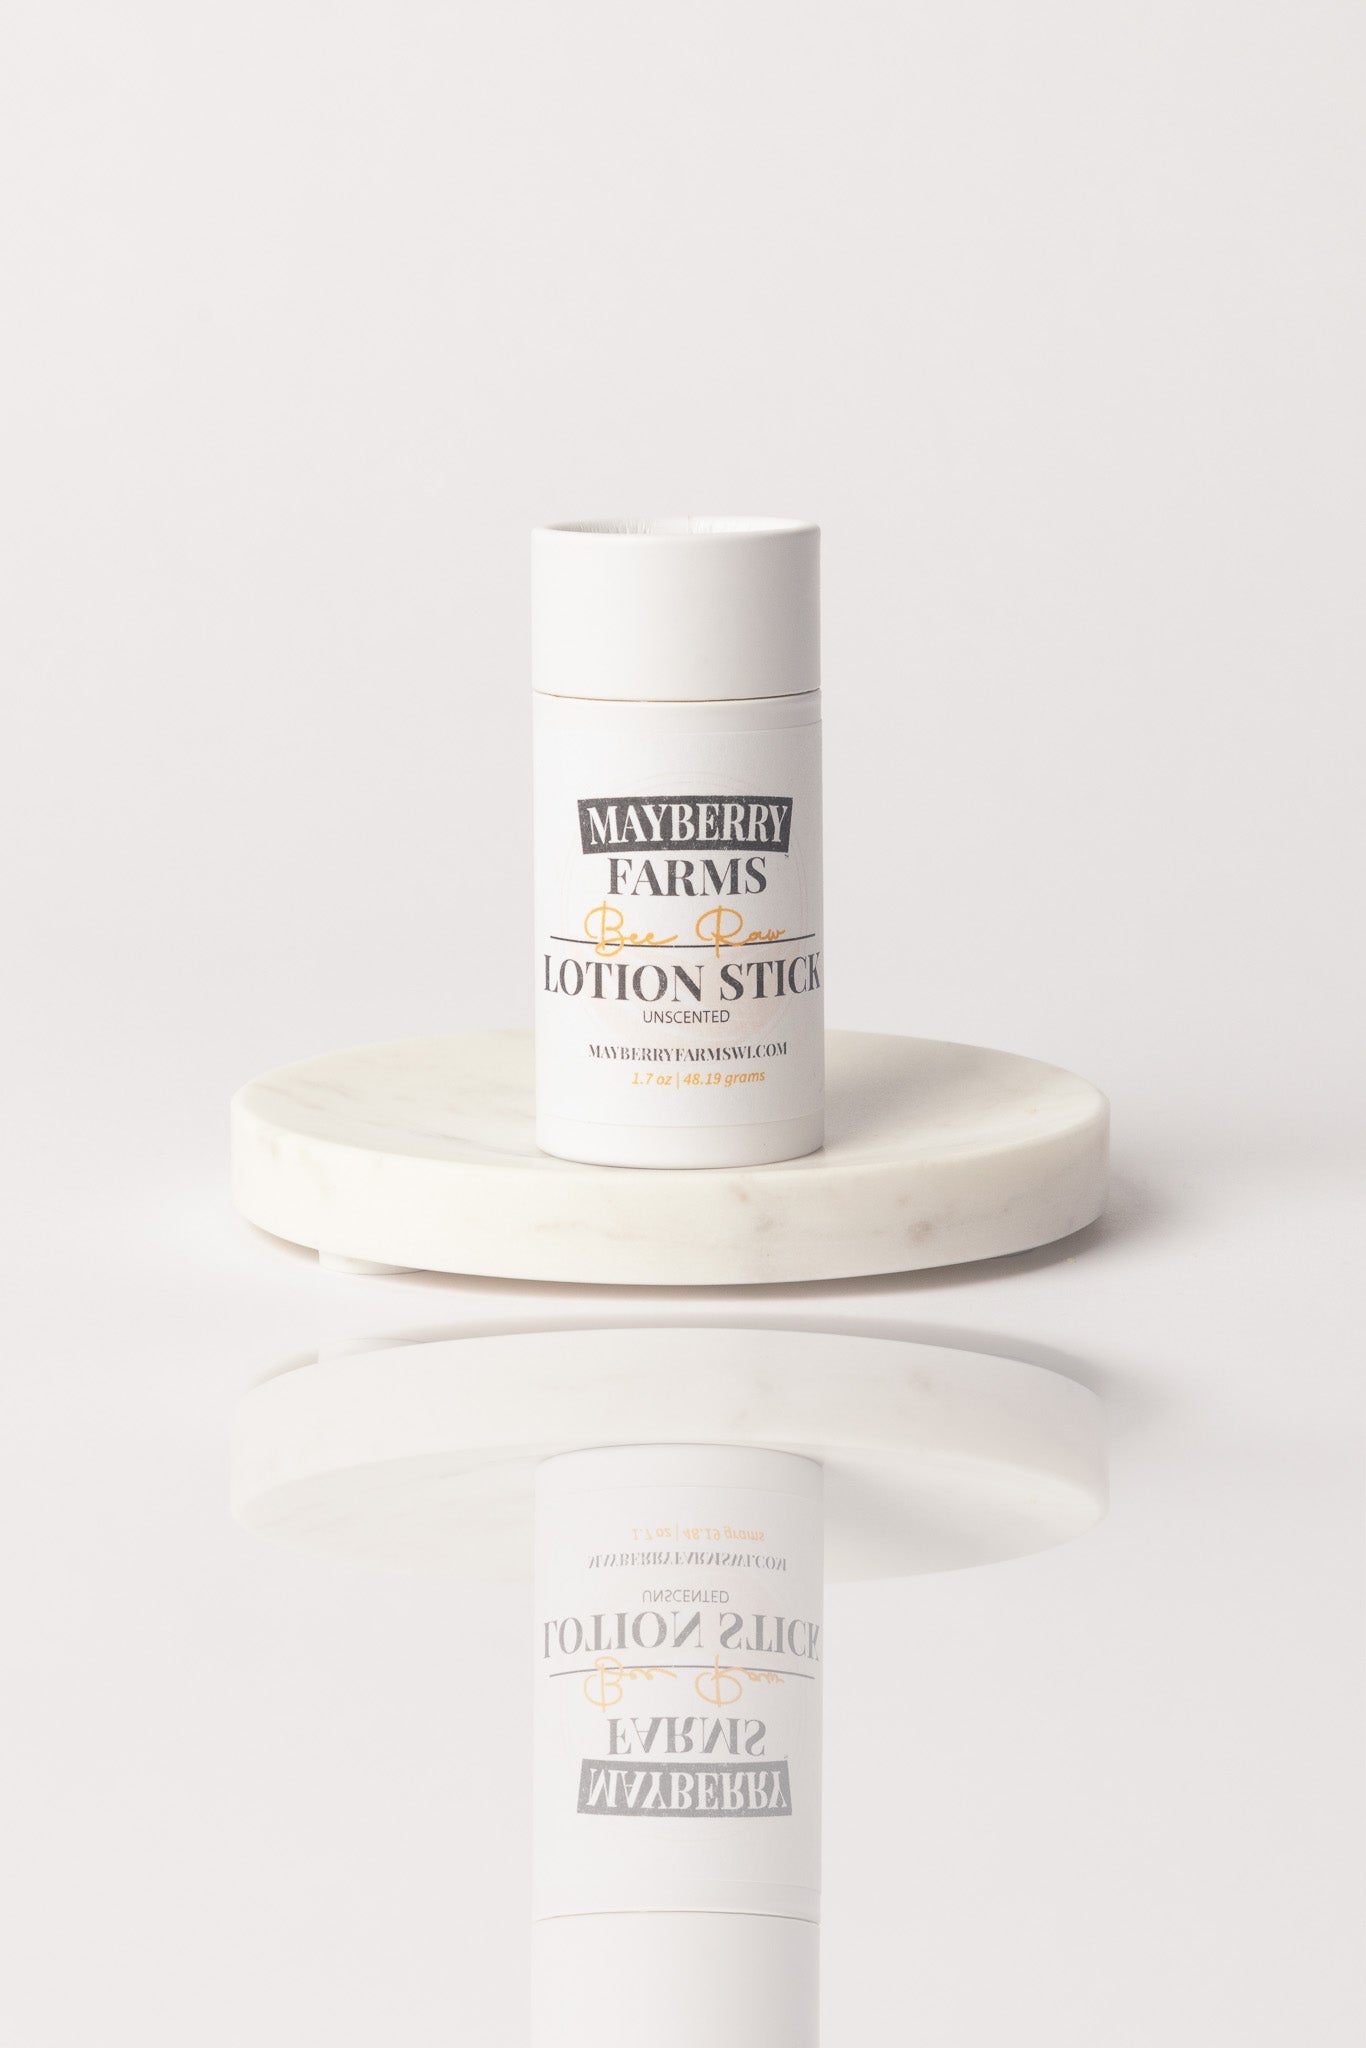 Unscented Beeswax & Tallow Lotion Stick - Mayberry Farms